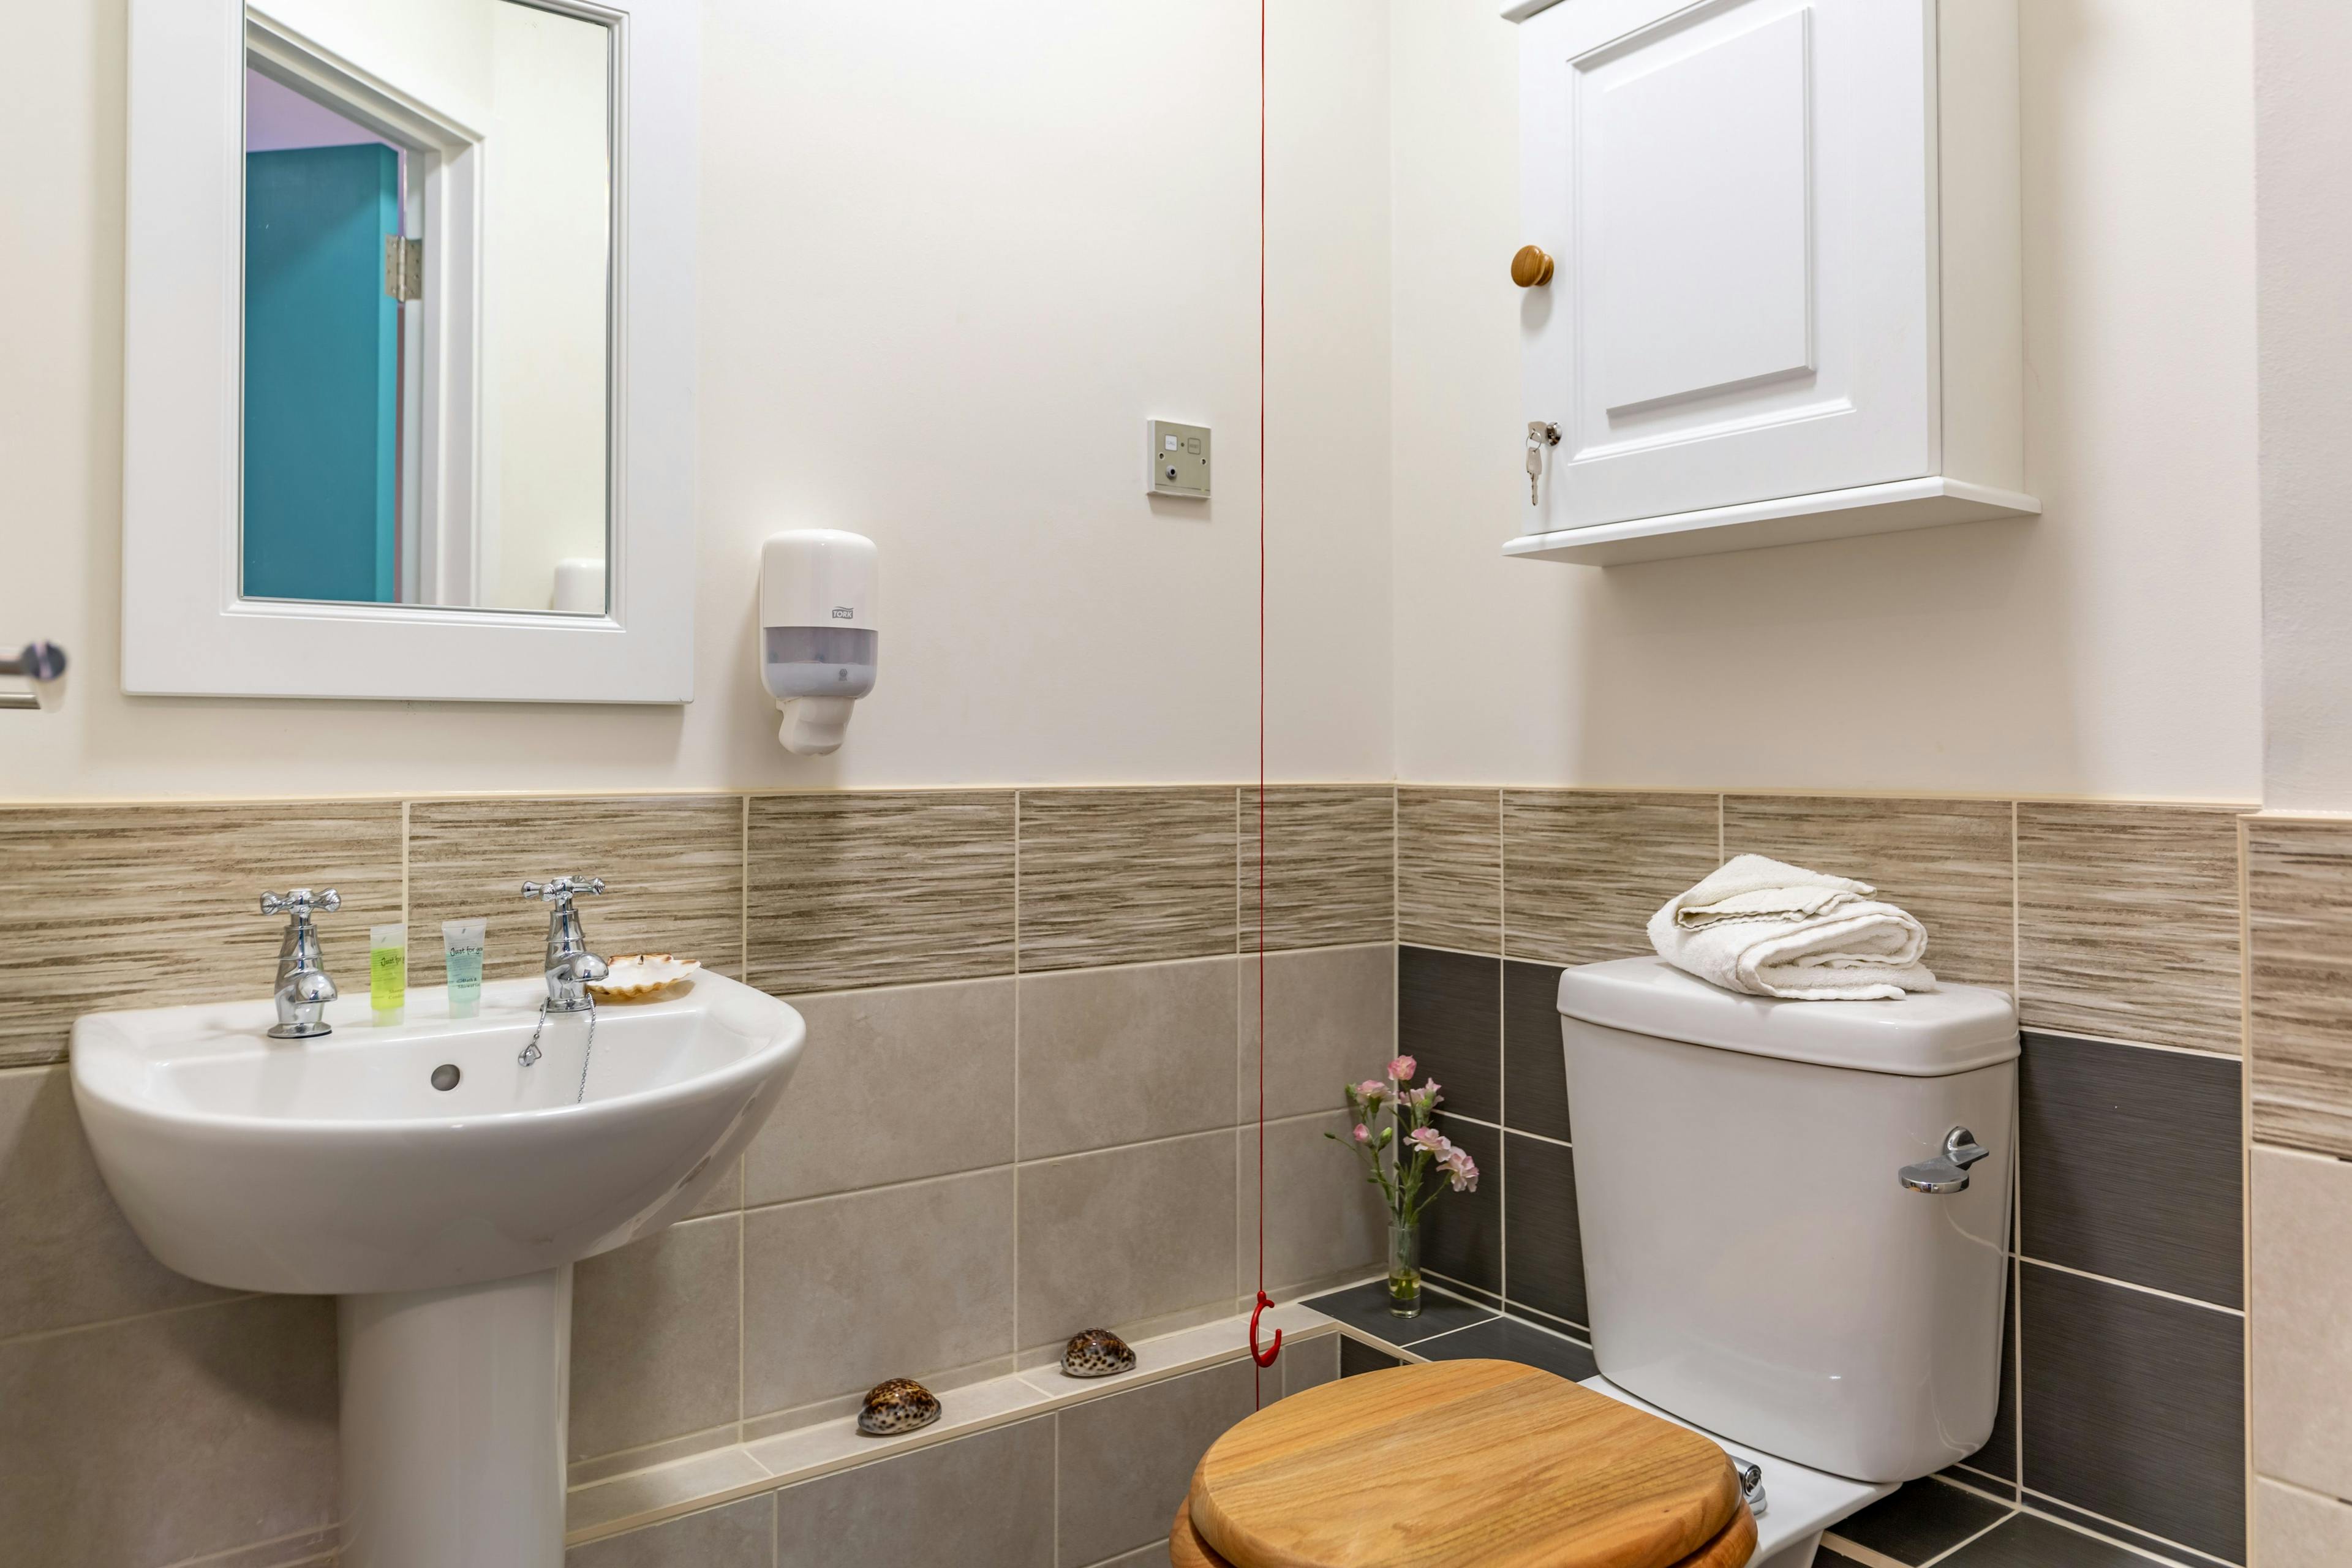 Bathroom of Vecta House Care Home in Newport, Isle of Wight